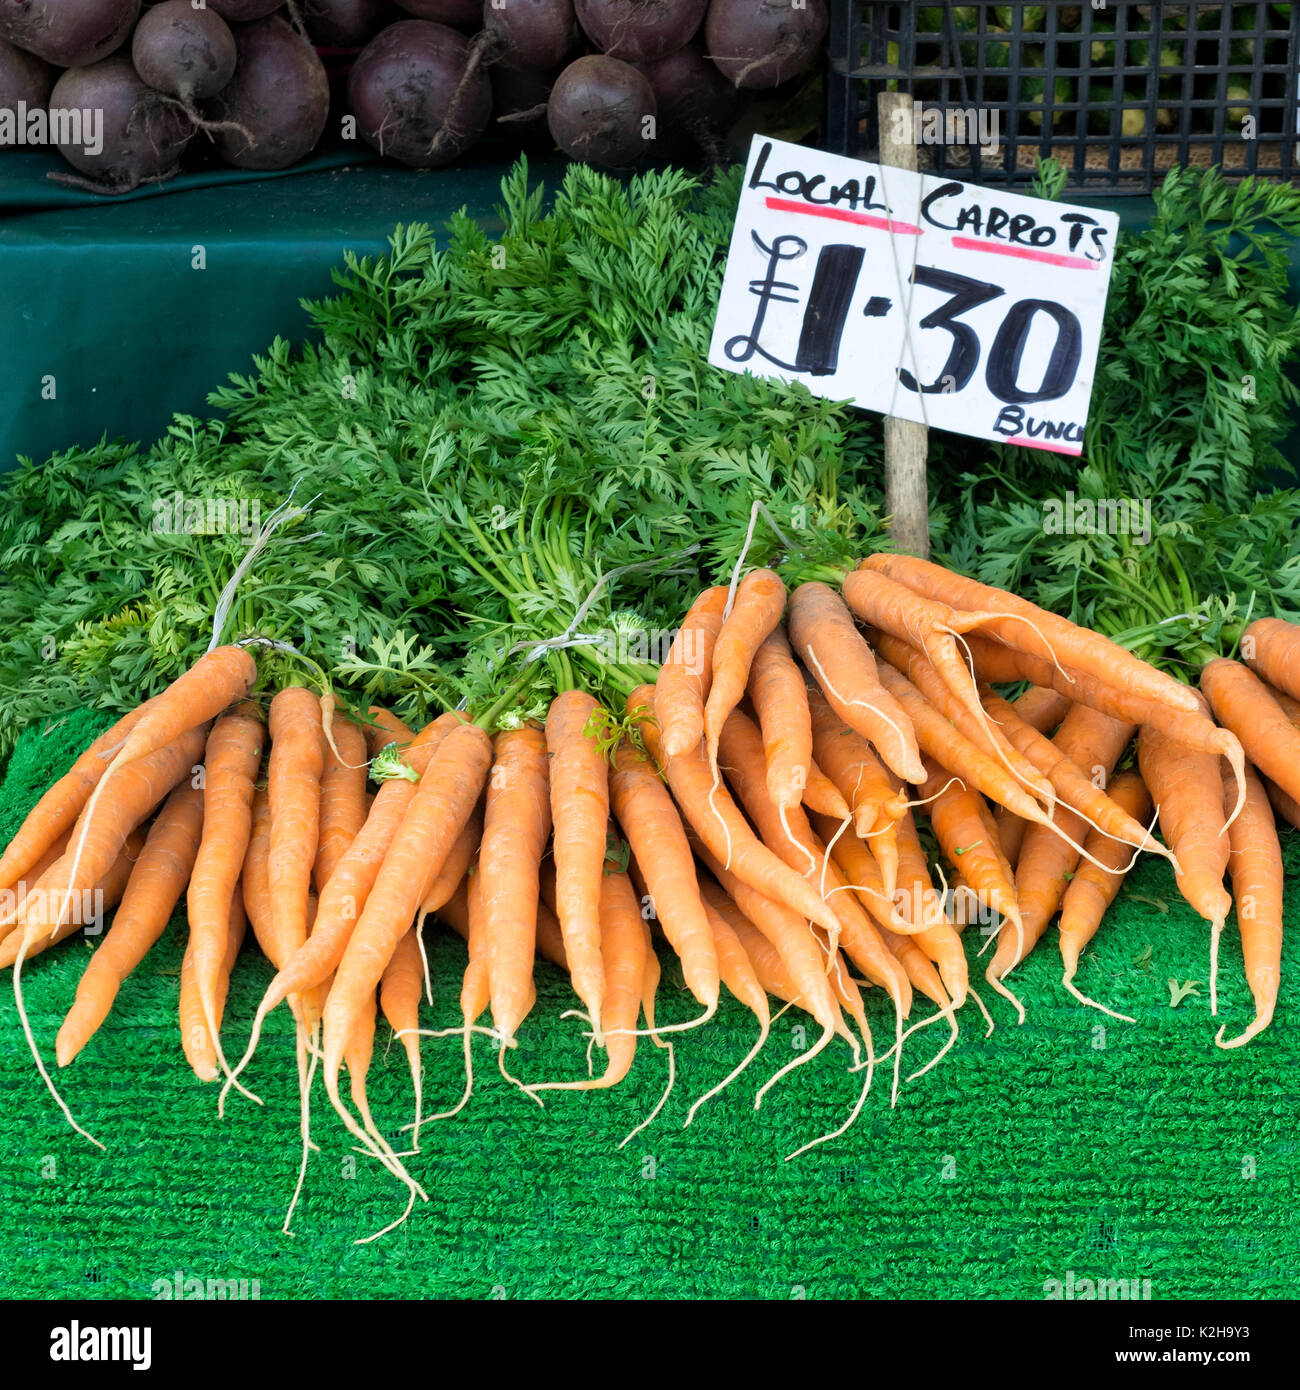 CAMBRIDGE, UK - AUGUST 11, 2017:  Local Grown Carrots for sale on a market stall Stock Photo